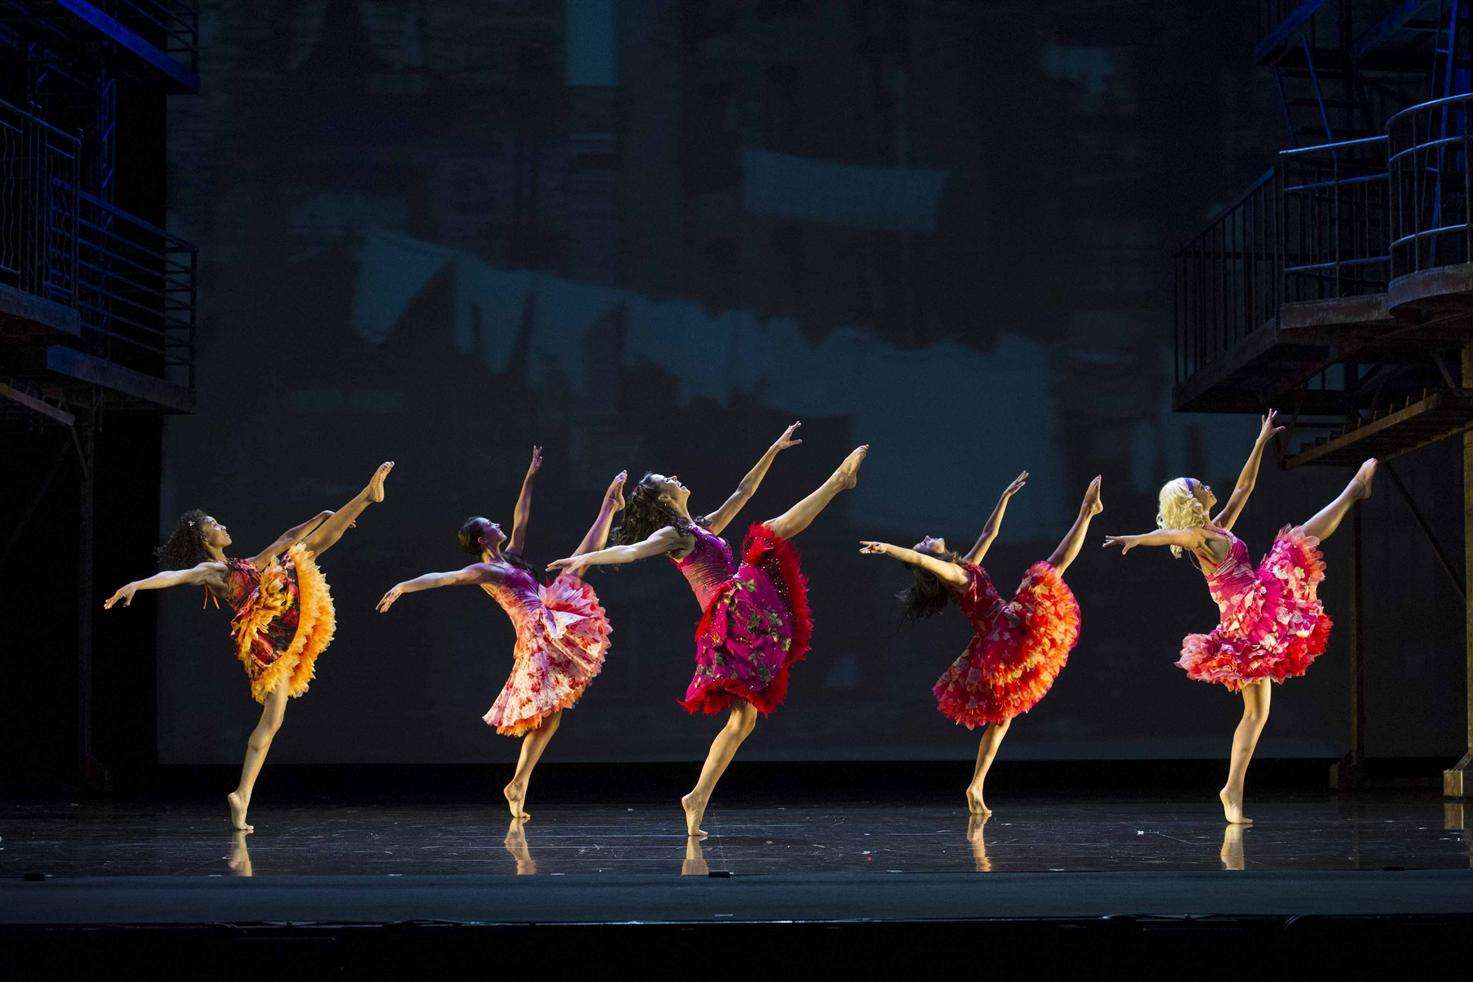 Djalenga Scott (centre) leads the hopeful group of Puerto Rican girls in West Side Story